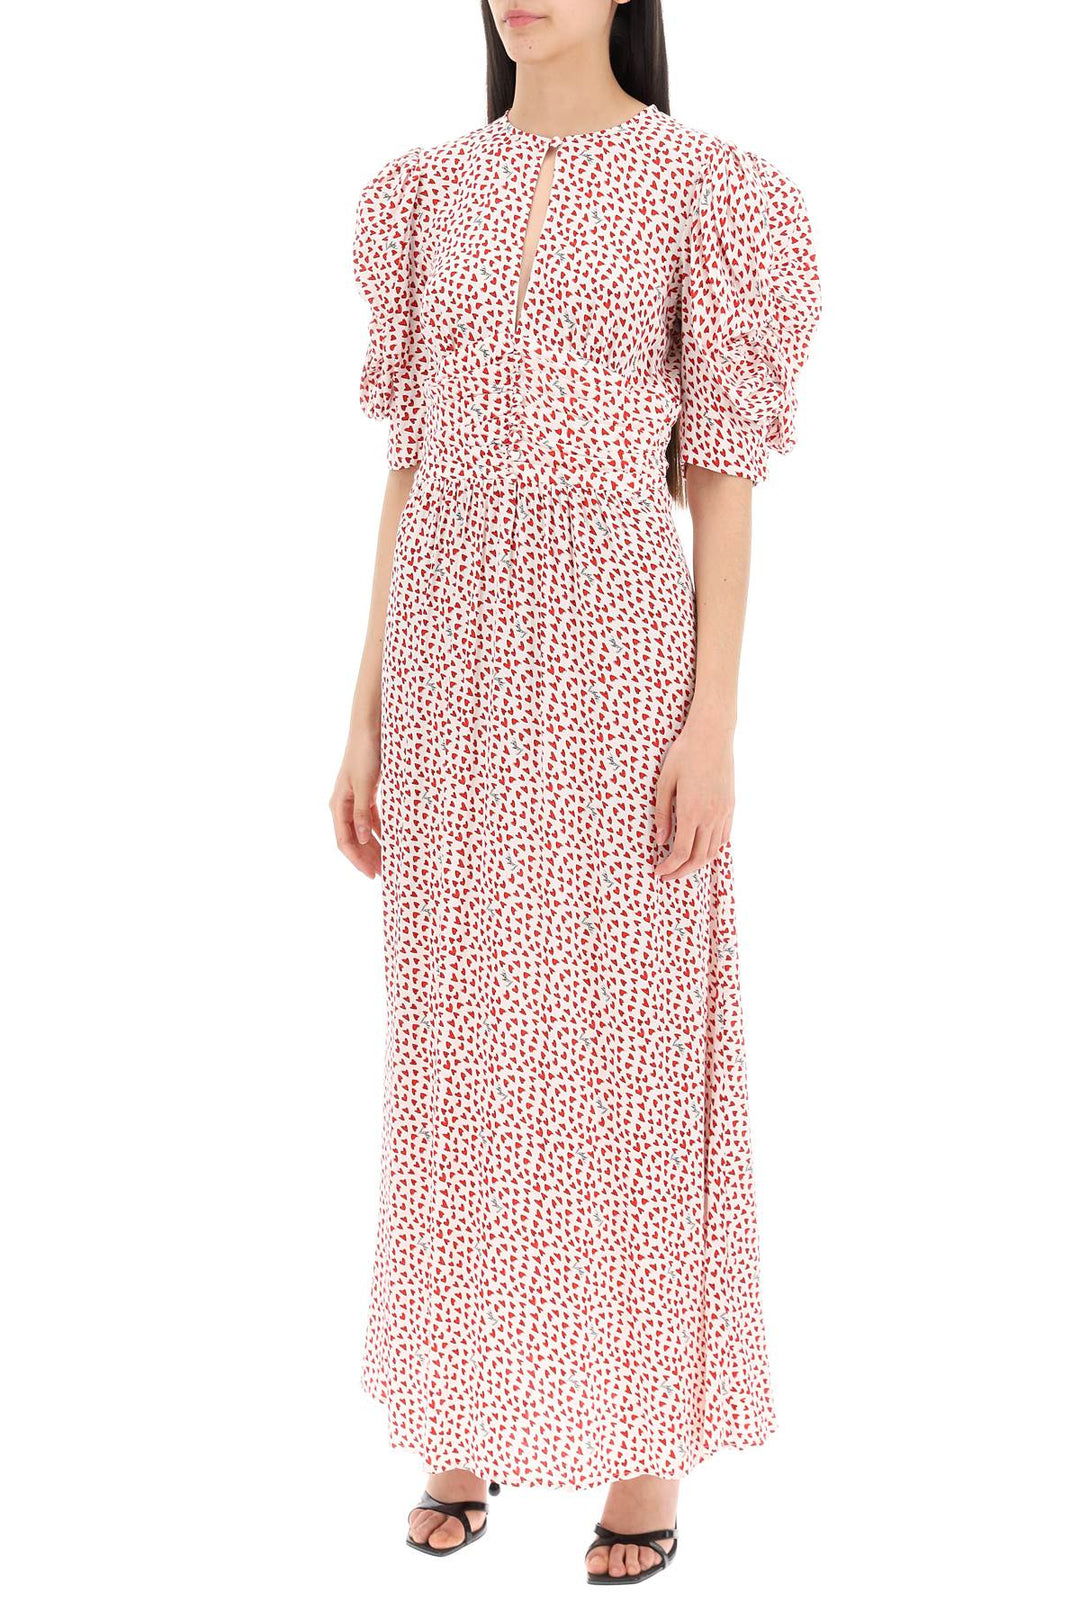 Rotate maxi dress with puffed sleeves-3